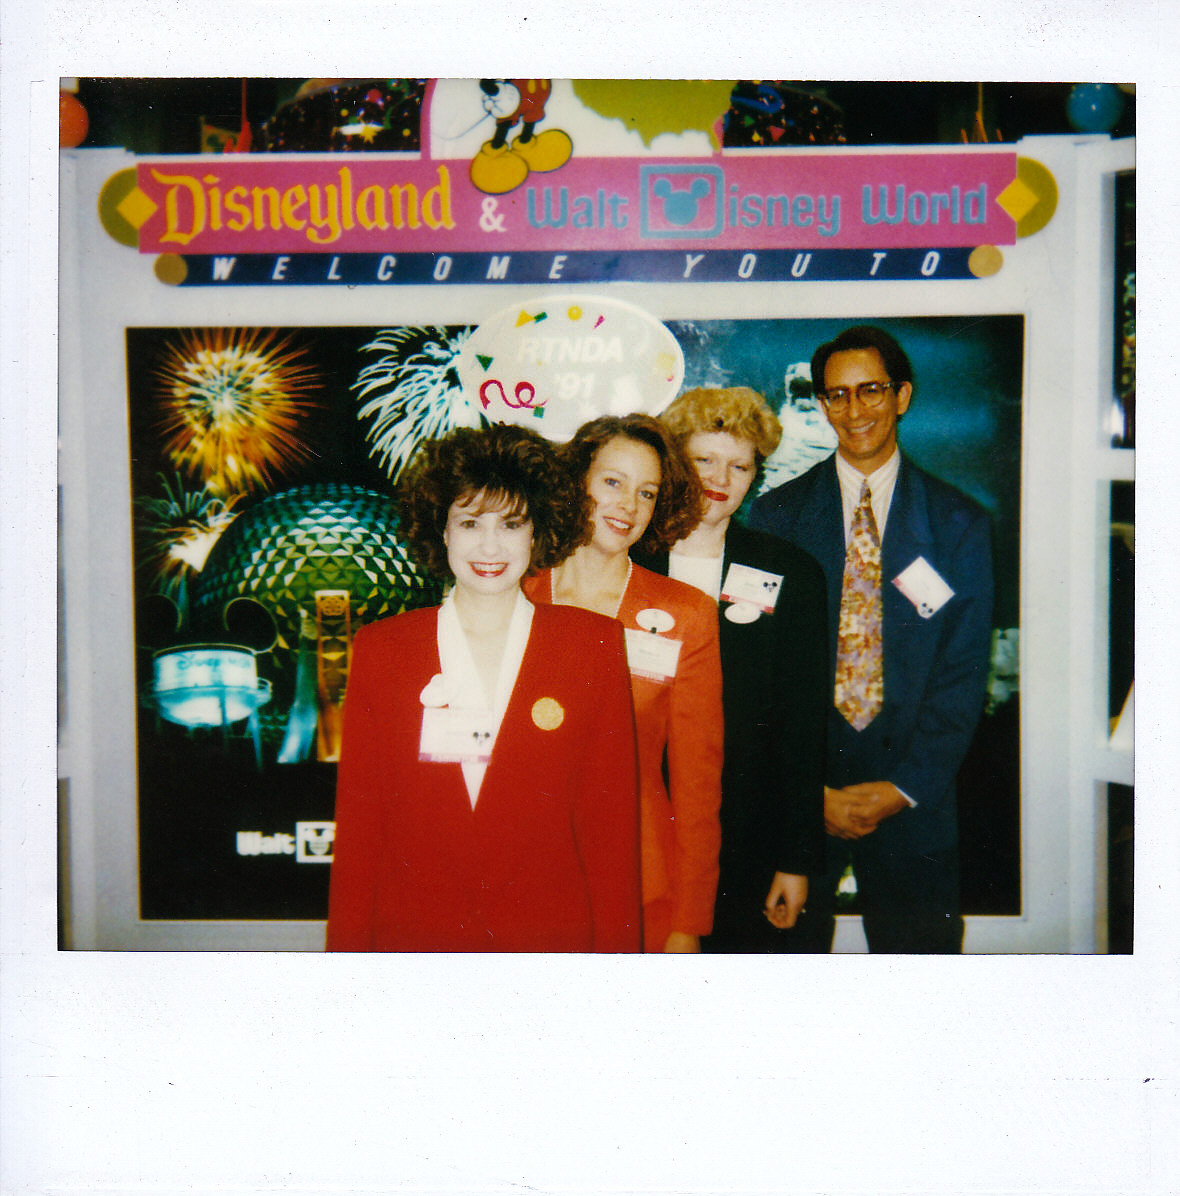 4 Disney Employees stand in a line at the Disneyland / Walt Disney World booth at the Radio-Television News Director's Association annual conference. Jennifer in a red suit, Barbara in an orange suit, Johanna in a green suit, and Glenn in a blue suit